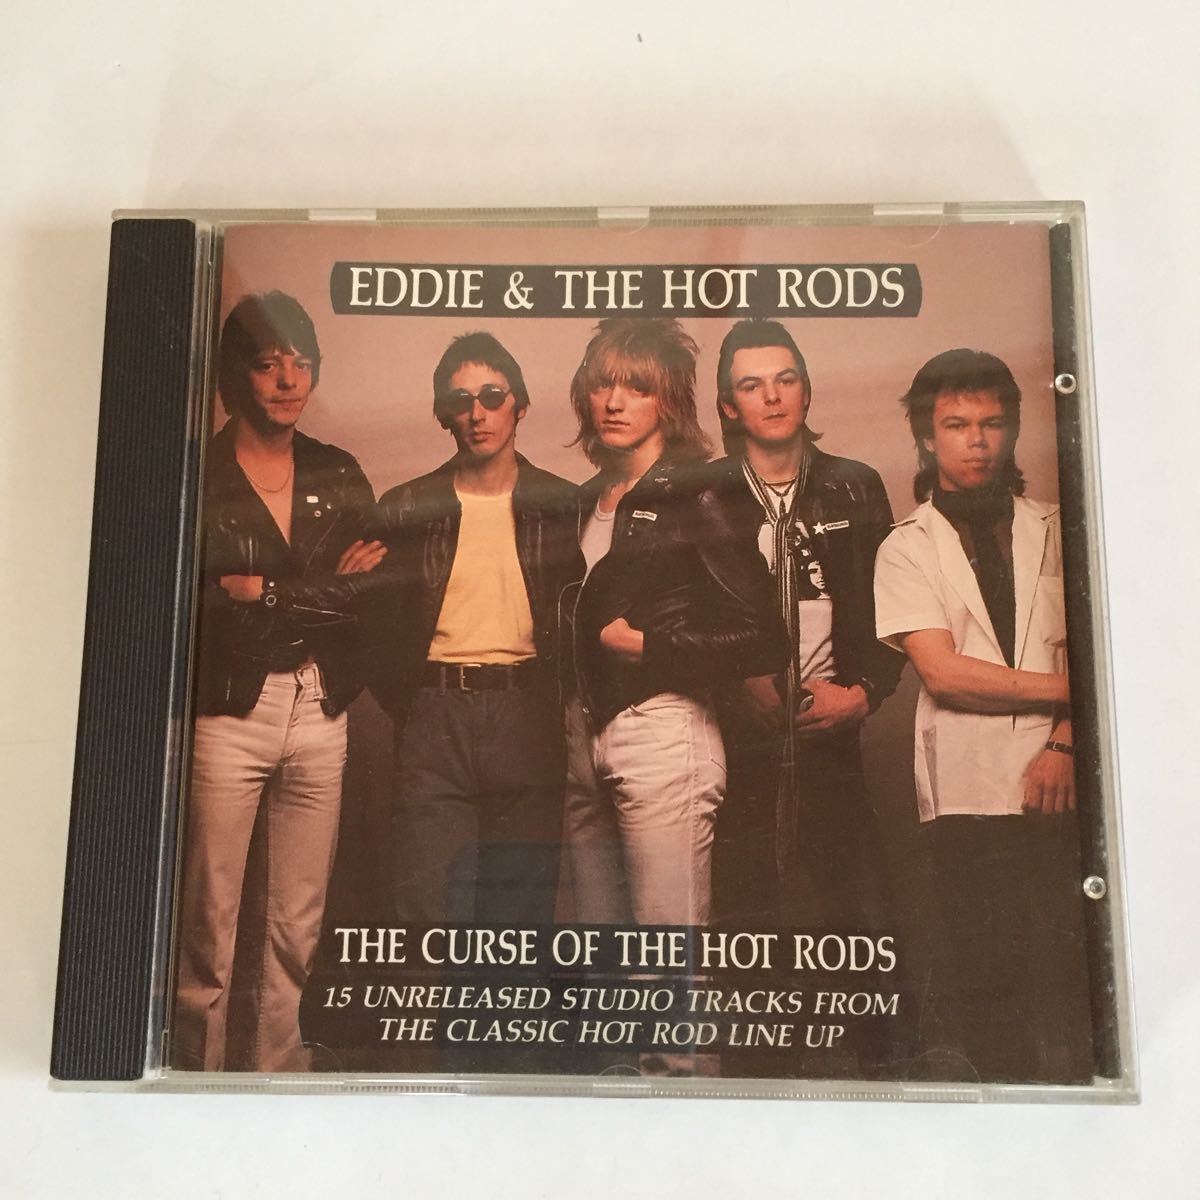 EDDIE & THE HOT RODS  THE CURSE OF THE HOT RODS 15 UNRELEASED 